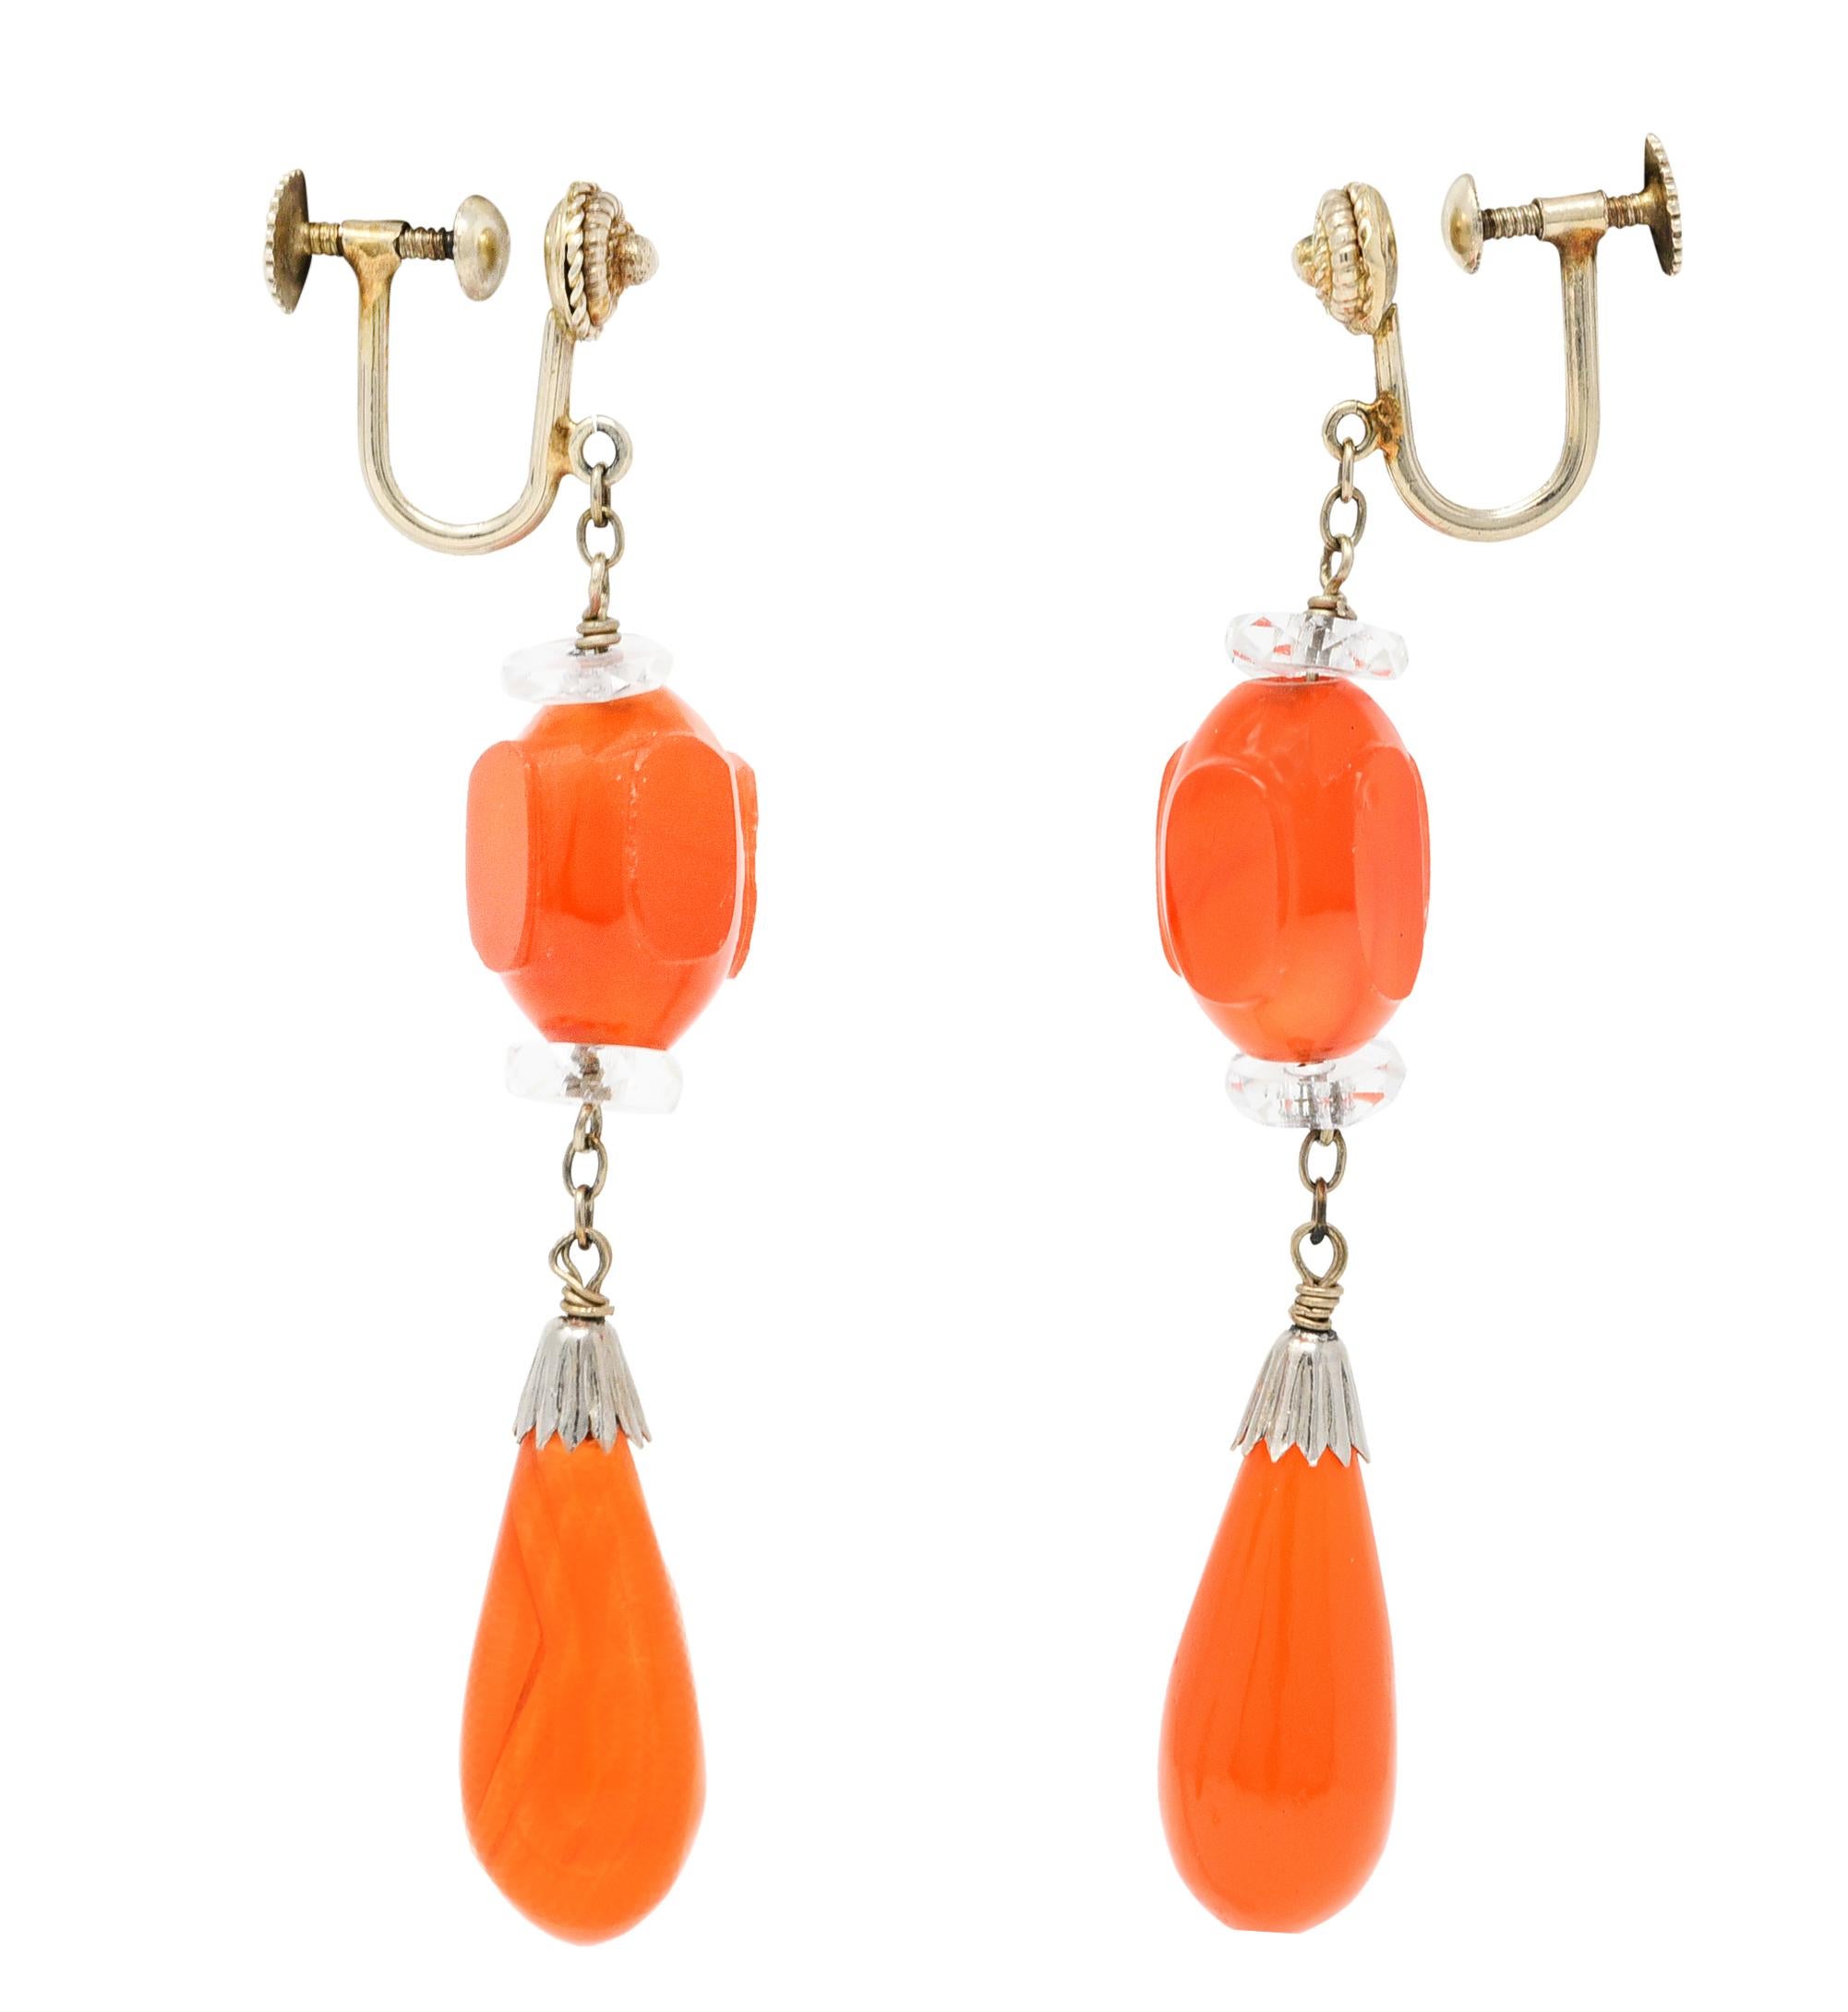 Screw back earrings feature uniquely carved carnelian surmounts

Suspending an articulated pampel drop of carved carnelian

Very well matched and a translucent orangey red color

Accented by faceted rock crystal rondelle spacer beads

Completed by a